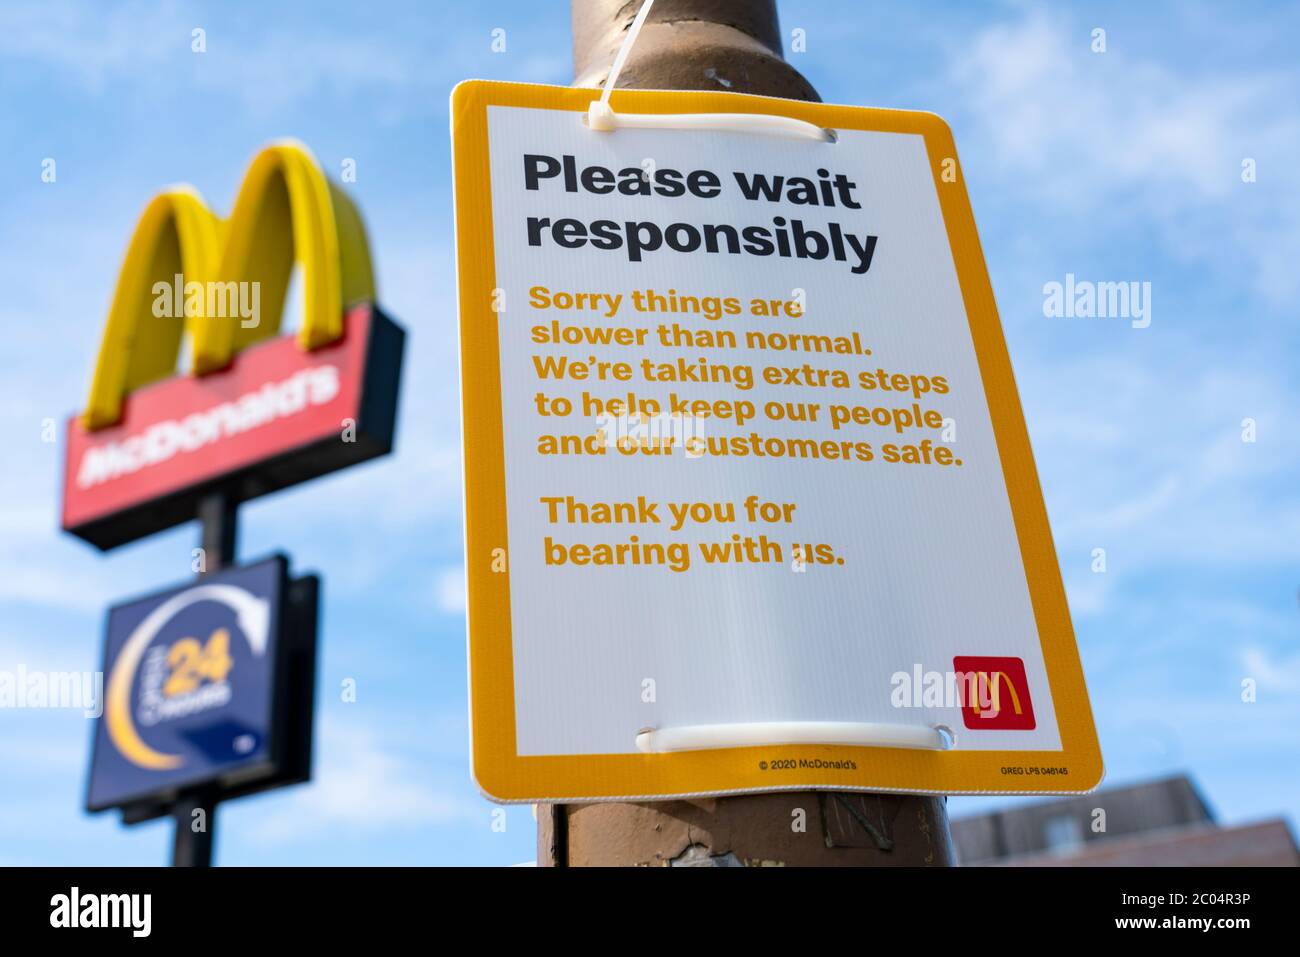 Edinburgh, Scotland, UK. 11 June 2020. Sign outside McDonalds drive-thru restaurant in Edinburgh warning about slow service times during Covid-19 re-opening of restaurants during lockdown relaxation. Iain Masterton/Alamy Live News Stock Photo